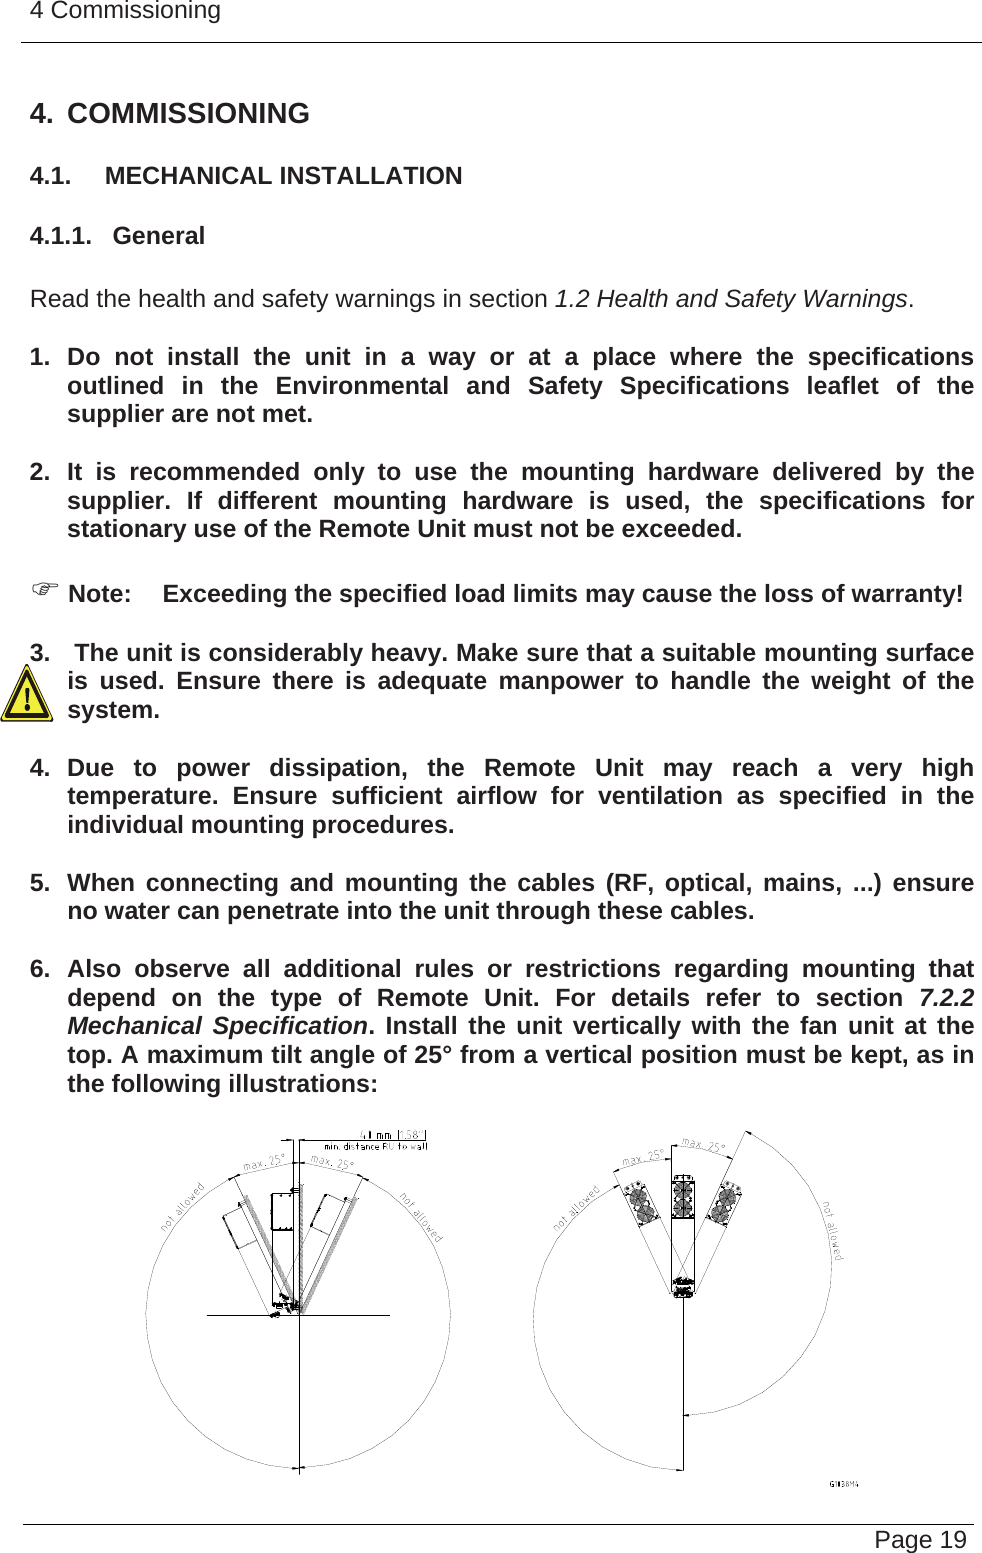 4 Commissioning   Page 194. COMMISSIONING 4.1.  MECHANICAL INSTALLATION 4.1.1.  General  Read the health and safety warnings in section 1.2 Health and Safety Warnings.  1. Do not install the unit in a way or at a place where the specifications outlined in the Environmental and Safety Specifications leaflet of the supplier are not met.  2. It is recommended only to use the mounting hardware delivered by the supplier. If different mounting hardware is used, the specifications for stationary use of the Remote Unit must not be exceeded.  ) Note:  Exceeding the specified load limits may cause the loss of warranty!  3.   The unit is considerably heavy. Make sure that a suitable mounting surface is used. Ensure there is adequate manpower to handle the weight of the system.  4. Due to power dissipation, the Remote Unit may reach a very high temperature. Ensure sufficient airflow for ventilation as specified in the individual mounting procedures.  5.  When connecting and mounting the cables (RF, optical, mains, ...) ensure no water can penetrate into the unit through these cables.  6. Also observe all additional rules or restrictions regarding mounting that depend on the type of Remote Unit. For details refer to section 7.2.2 Mechanical Specification. Install the unit vertically with the fan unit at the top. A maximum tilt angle of 25° from a vertical position must be kept, as in the following illustrations:     